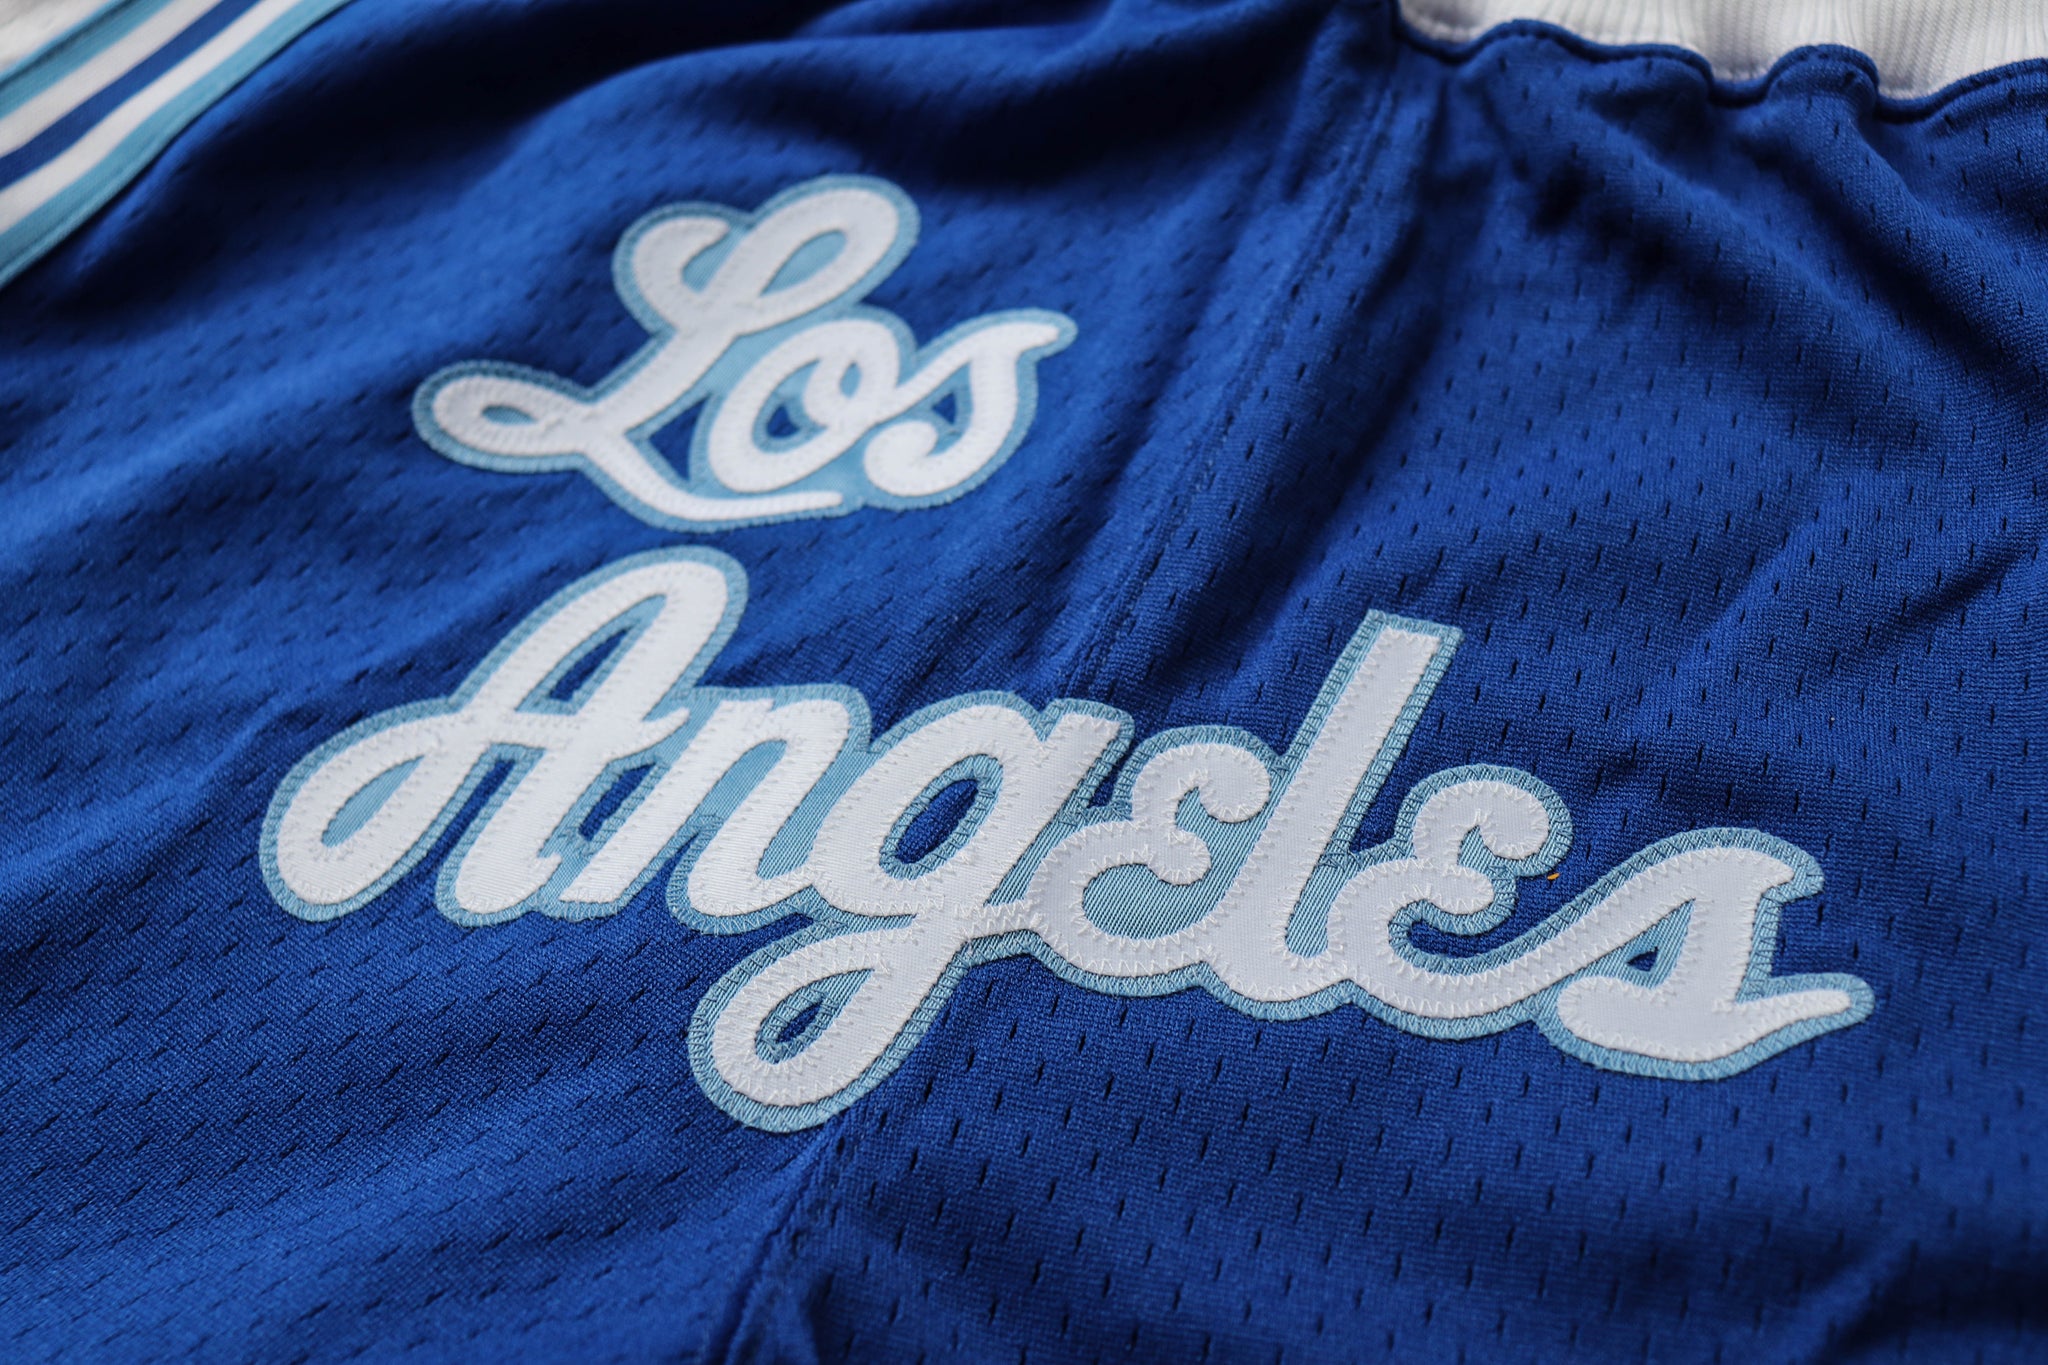 Mitchell & Ness Los Angeles Lakers 1996-1997 "LOS ANGELES" Royal Blue Authentic Shorts